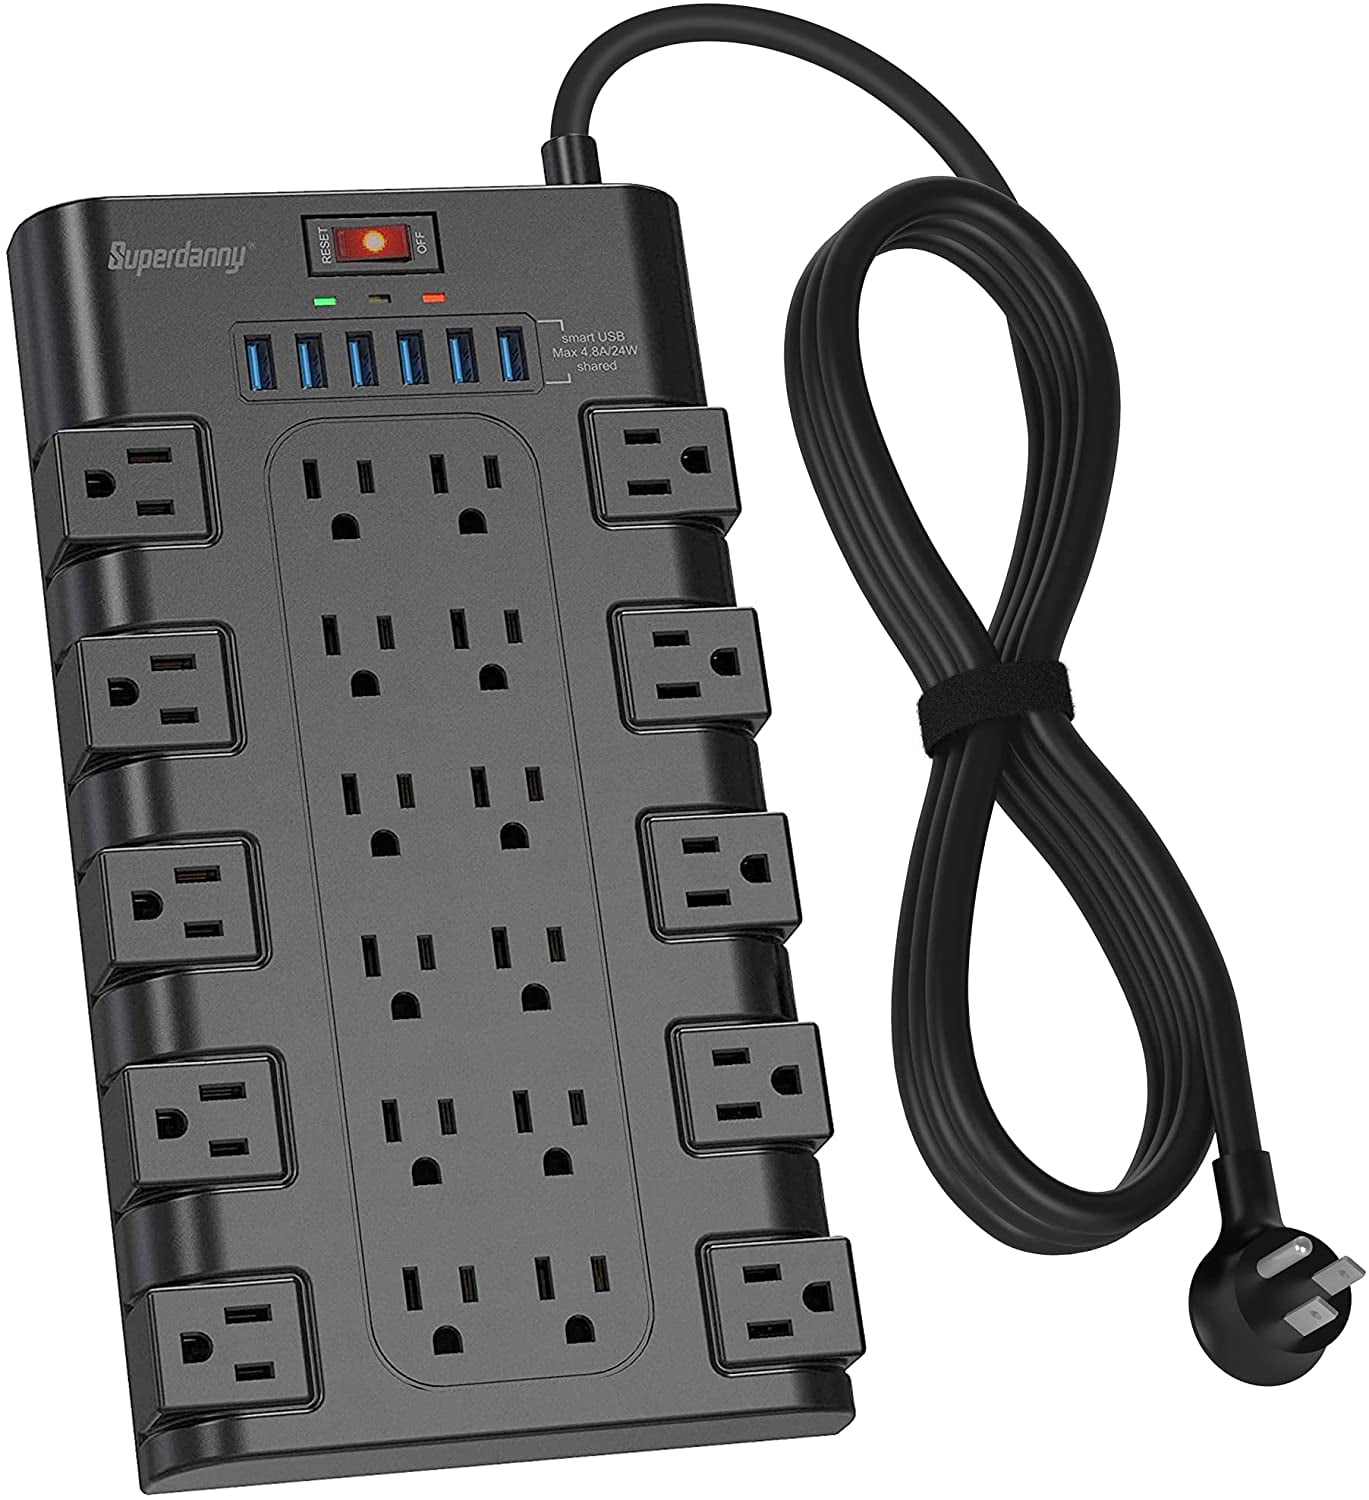 W4W Twin Extension Cord Power Strip - 12 Foot Cord - 6 feet on Each Side -  Flat Head (Wall Hugger) Outlet Plug - 6 Polarized Outlets with Safety Cover